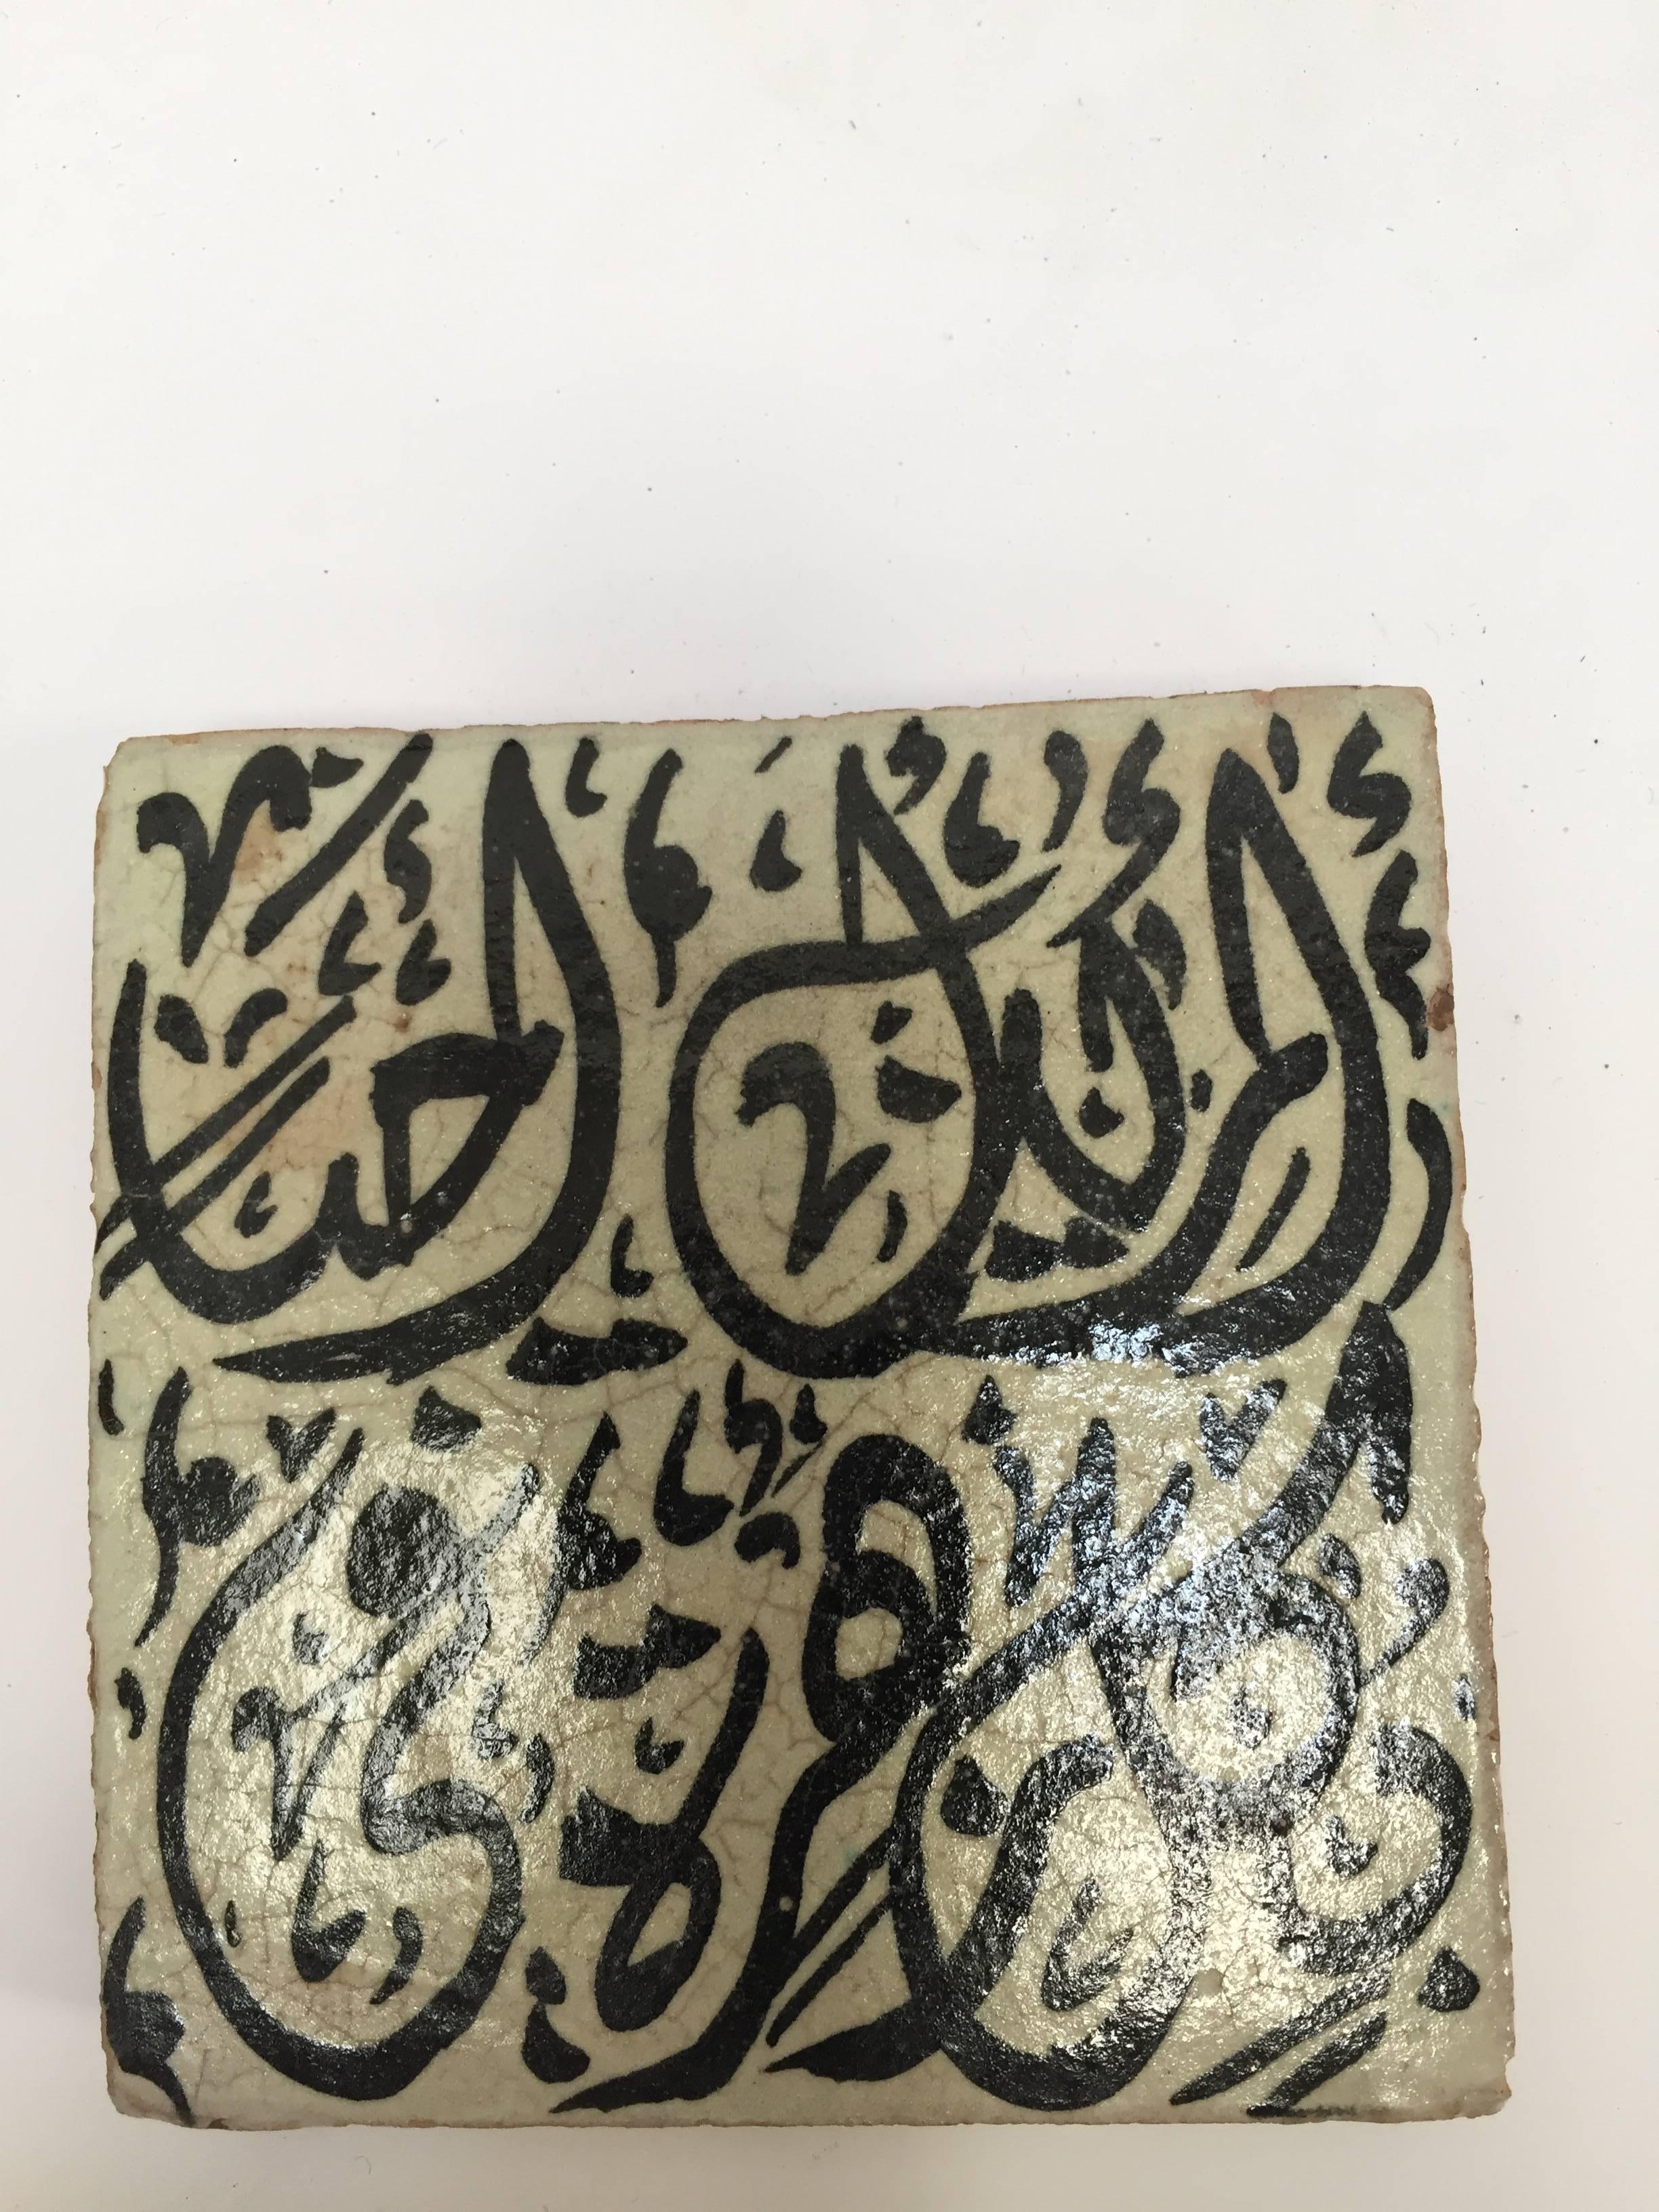 Moroccan handcrafted decorative tile with hand-painted Arabic writing in black on ivory crackle glazed ceramic.
Arabic poetry words on ceramic tile hand-painted by artist in Fez Morocco.
Great zellige decorative Moorish Artwork.
Tile is 4 in.x 4